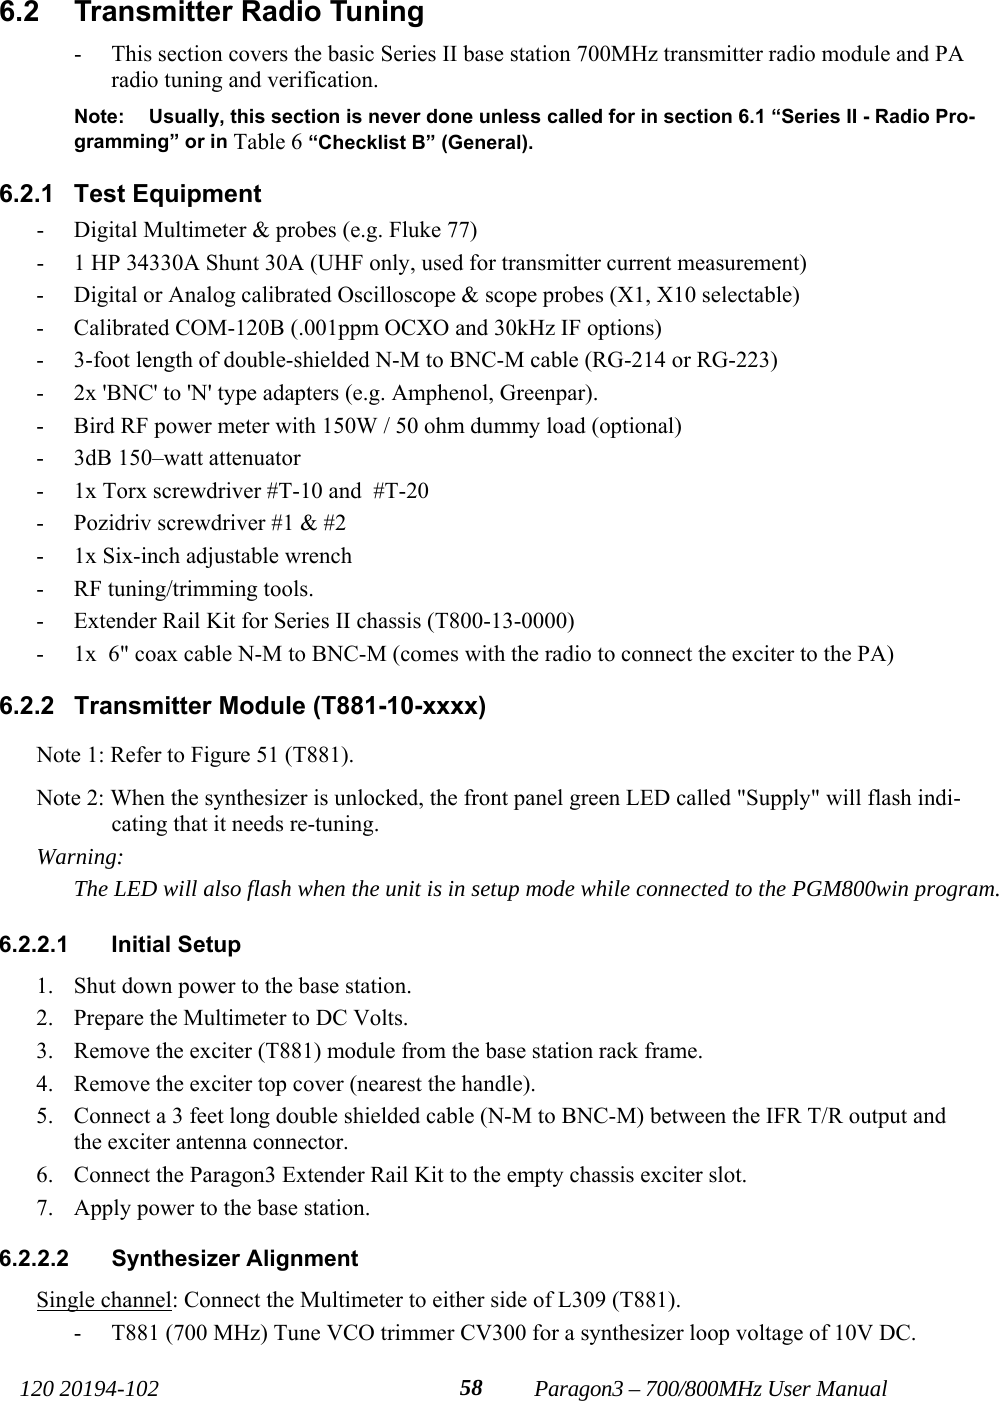   120 20194-102   Paragon3 – 700/800MHz User Manual 586.2  Transmitter Radio Tuning - This section covers the basic Series II base station 700MHz transmitter radio module and PA radio tuning and verification. Note:  Usually, this section is never done unless called for in section 6.1 “Series II - Radio Pro-gramming” or in Table 6 “Checklist B” (General). 6.2.1 Test Equipment - Digital Multimeter &amp; probes (e.g. Fluke 77) - 1 HP 34330A Shunt 30A (UHF only, used for transmitter current measurement) - Digital or Analog calibrated Oscilloscope &amp; scope probes (X1, X10 selectable) - Calibrated COM-120B (.001ppm OCXO and 30kHz IF options) - 3-foot length of double-shielded N-M to BNC-M cable (RG-214 or RG-223) - 2x &apos;BNC&apos; to &apos;N&apos; type adapters (e.g. Amphenol, Greenpar). - Bird RF power meter with 150W / 50 ohm dummy load (optional) - 3dB 150–watt attenuator - 1x Torx screwdriver #T-10 and  #T-20 - Pozidriv screwdriver #1 &amp; #2 - 1x Six-inch adjustable wrench - RF tuning/trimming tools. - Extender Rail Kit for Series II chassis (T800-13-0000)  - 1x  6&quot; coax cable N-M to BNC-M (comes with the radio to connect the exciter to the PA) 6.2.2 Transmitter Module (T881-10-xxxx) Note 1: Refer to Figure 51 (T881). Note 2: When the synthesizer is unlocked, the front panel green LED called &quot;Supply&quot; will flash indi-cating that it needs re-tuning.  Warning:    The LED will also flash when the unit is in setup mode while connected to the PGM800win program.  6.2.2.1 Initial Setup 1. Shut down power to the base station. 2. Prepare the Multimeter to DC Volts. 3. Remove the exciter (T881) module from the base station rack frame. 4. Remove the exciter top cover (nearest the handle). 5. Connect a 3 feet long double shielded cable (N-M to BNC-M) between the IFR T/R output and the exciter antenna connector. 6. Connect the Paragon3 Extender Rail Kit to the empty chassis exciter slot. 7. Apply power to the base station. 6.2.2.2  Synthesizer Alignment  Single channel: Connect the Multimeter to either side of L309 (T881).  - T881 (700 MHz) Tune VCO trimmer CV300 for a synthesizer loop voltage of 10V DC. 